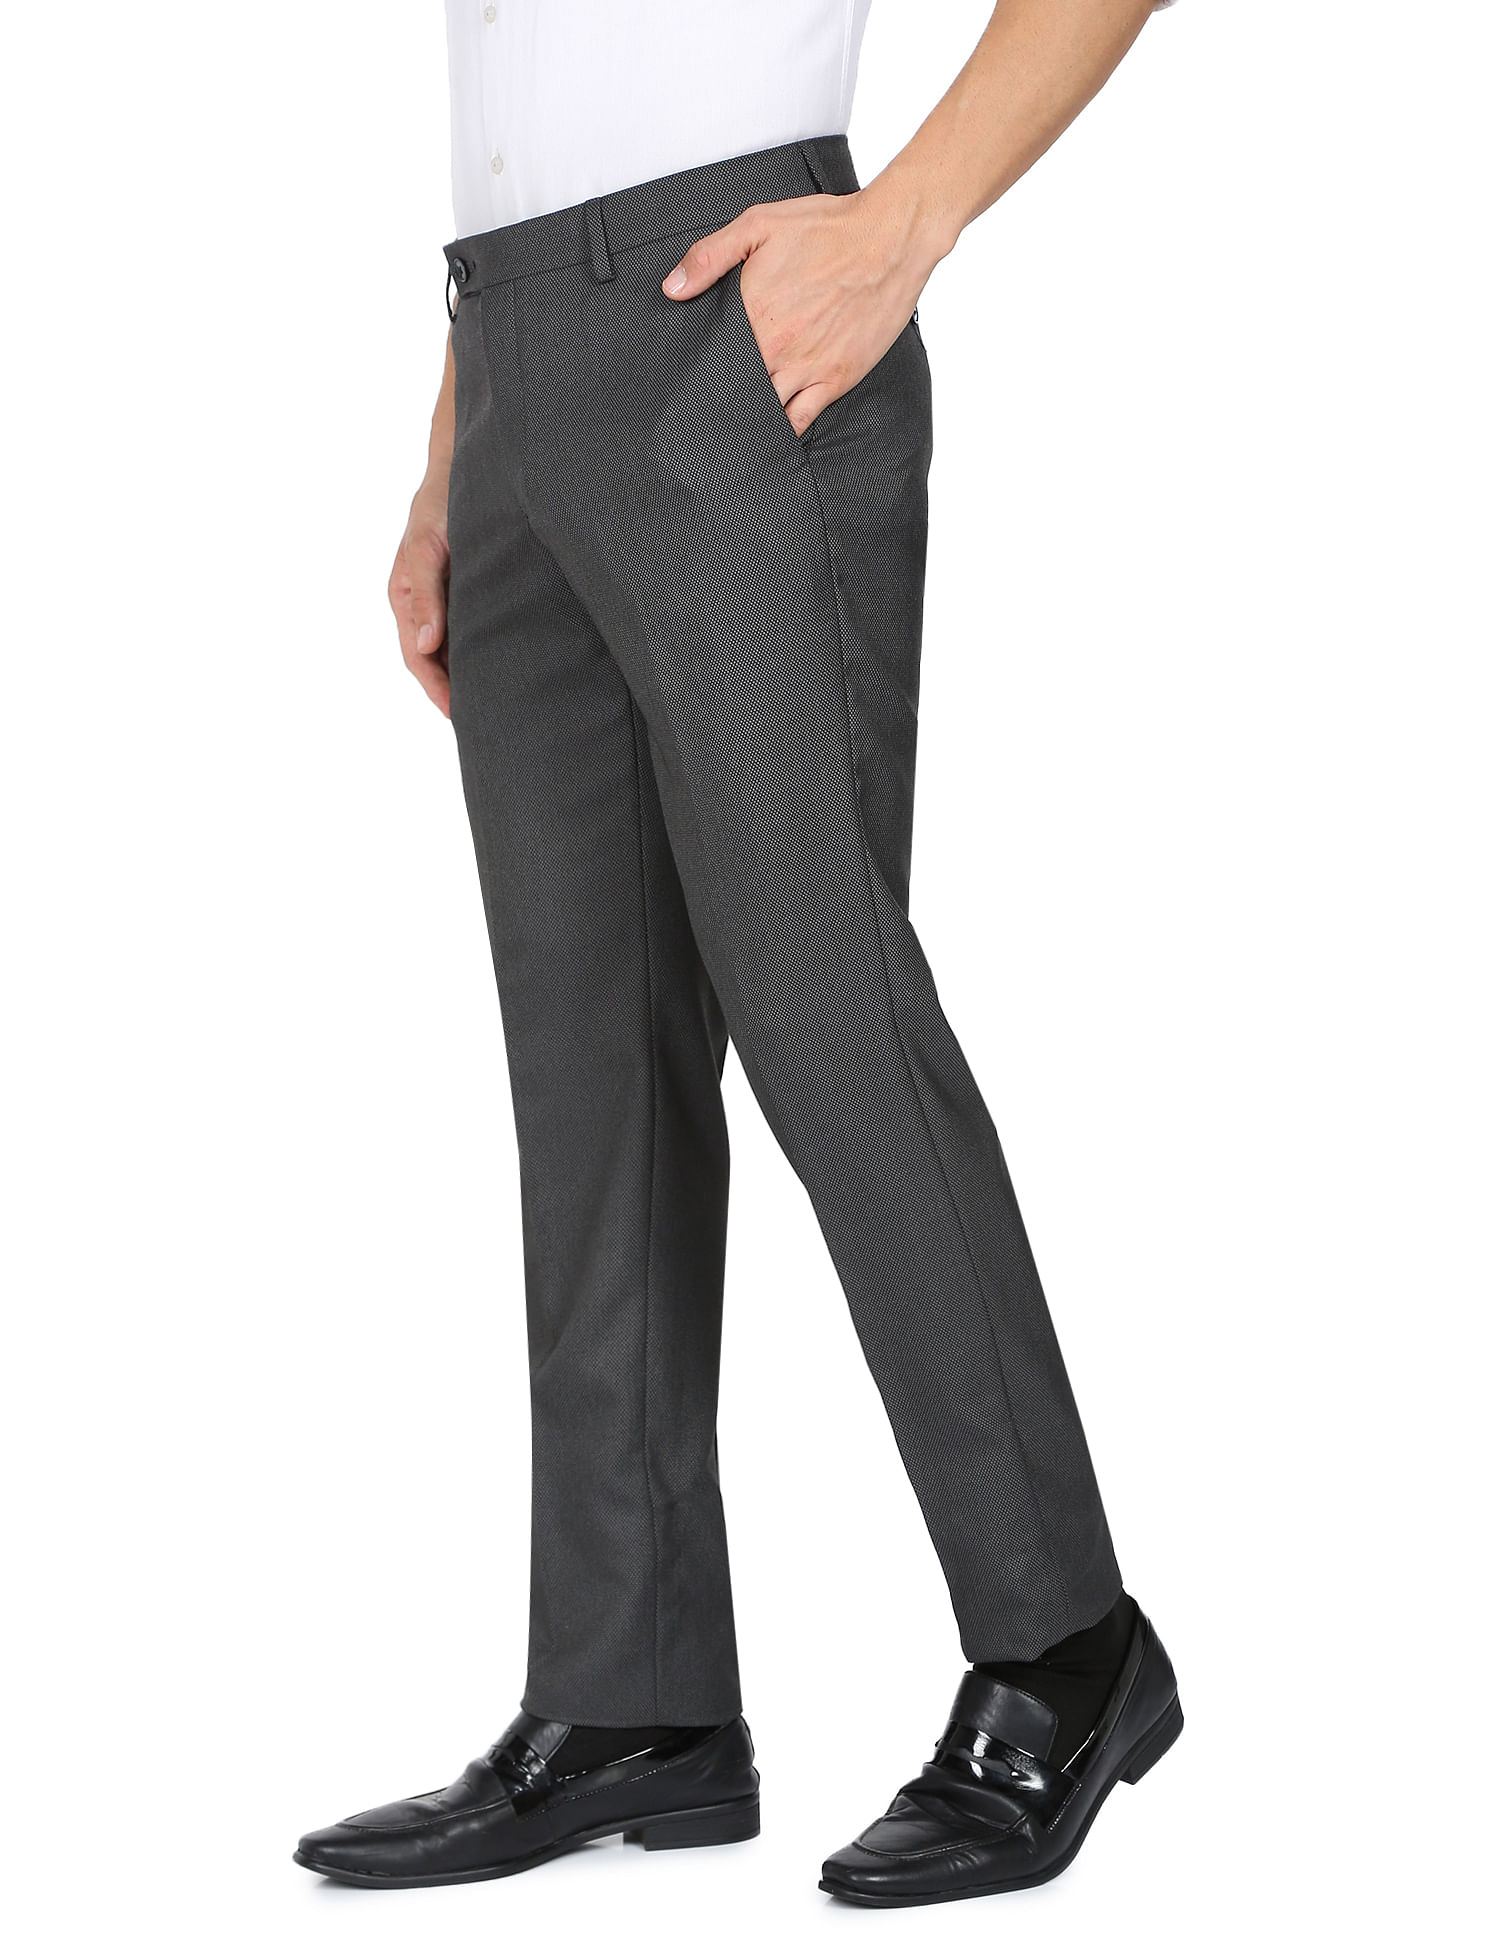 NNNOW.com Sale - arrow formal trousers new - Shop Online at Lowest Price in  India